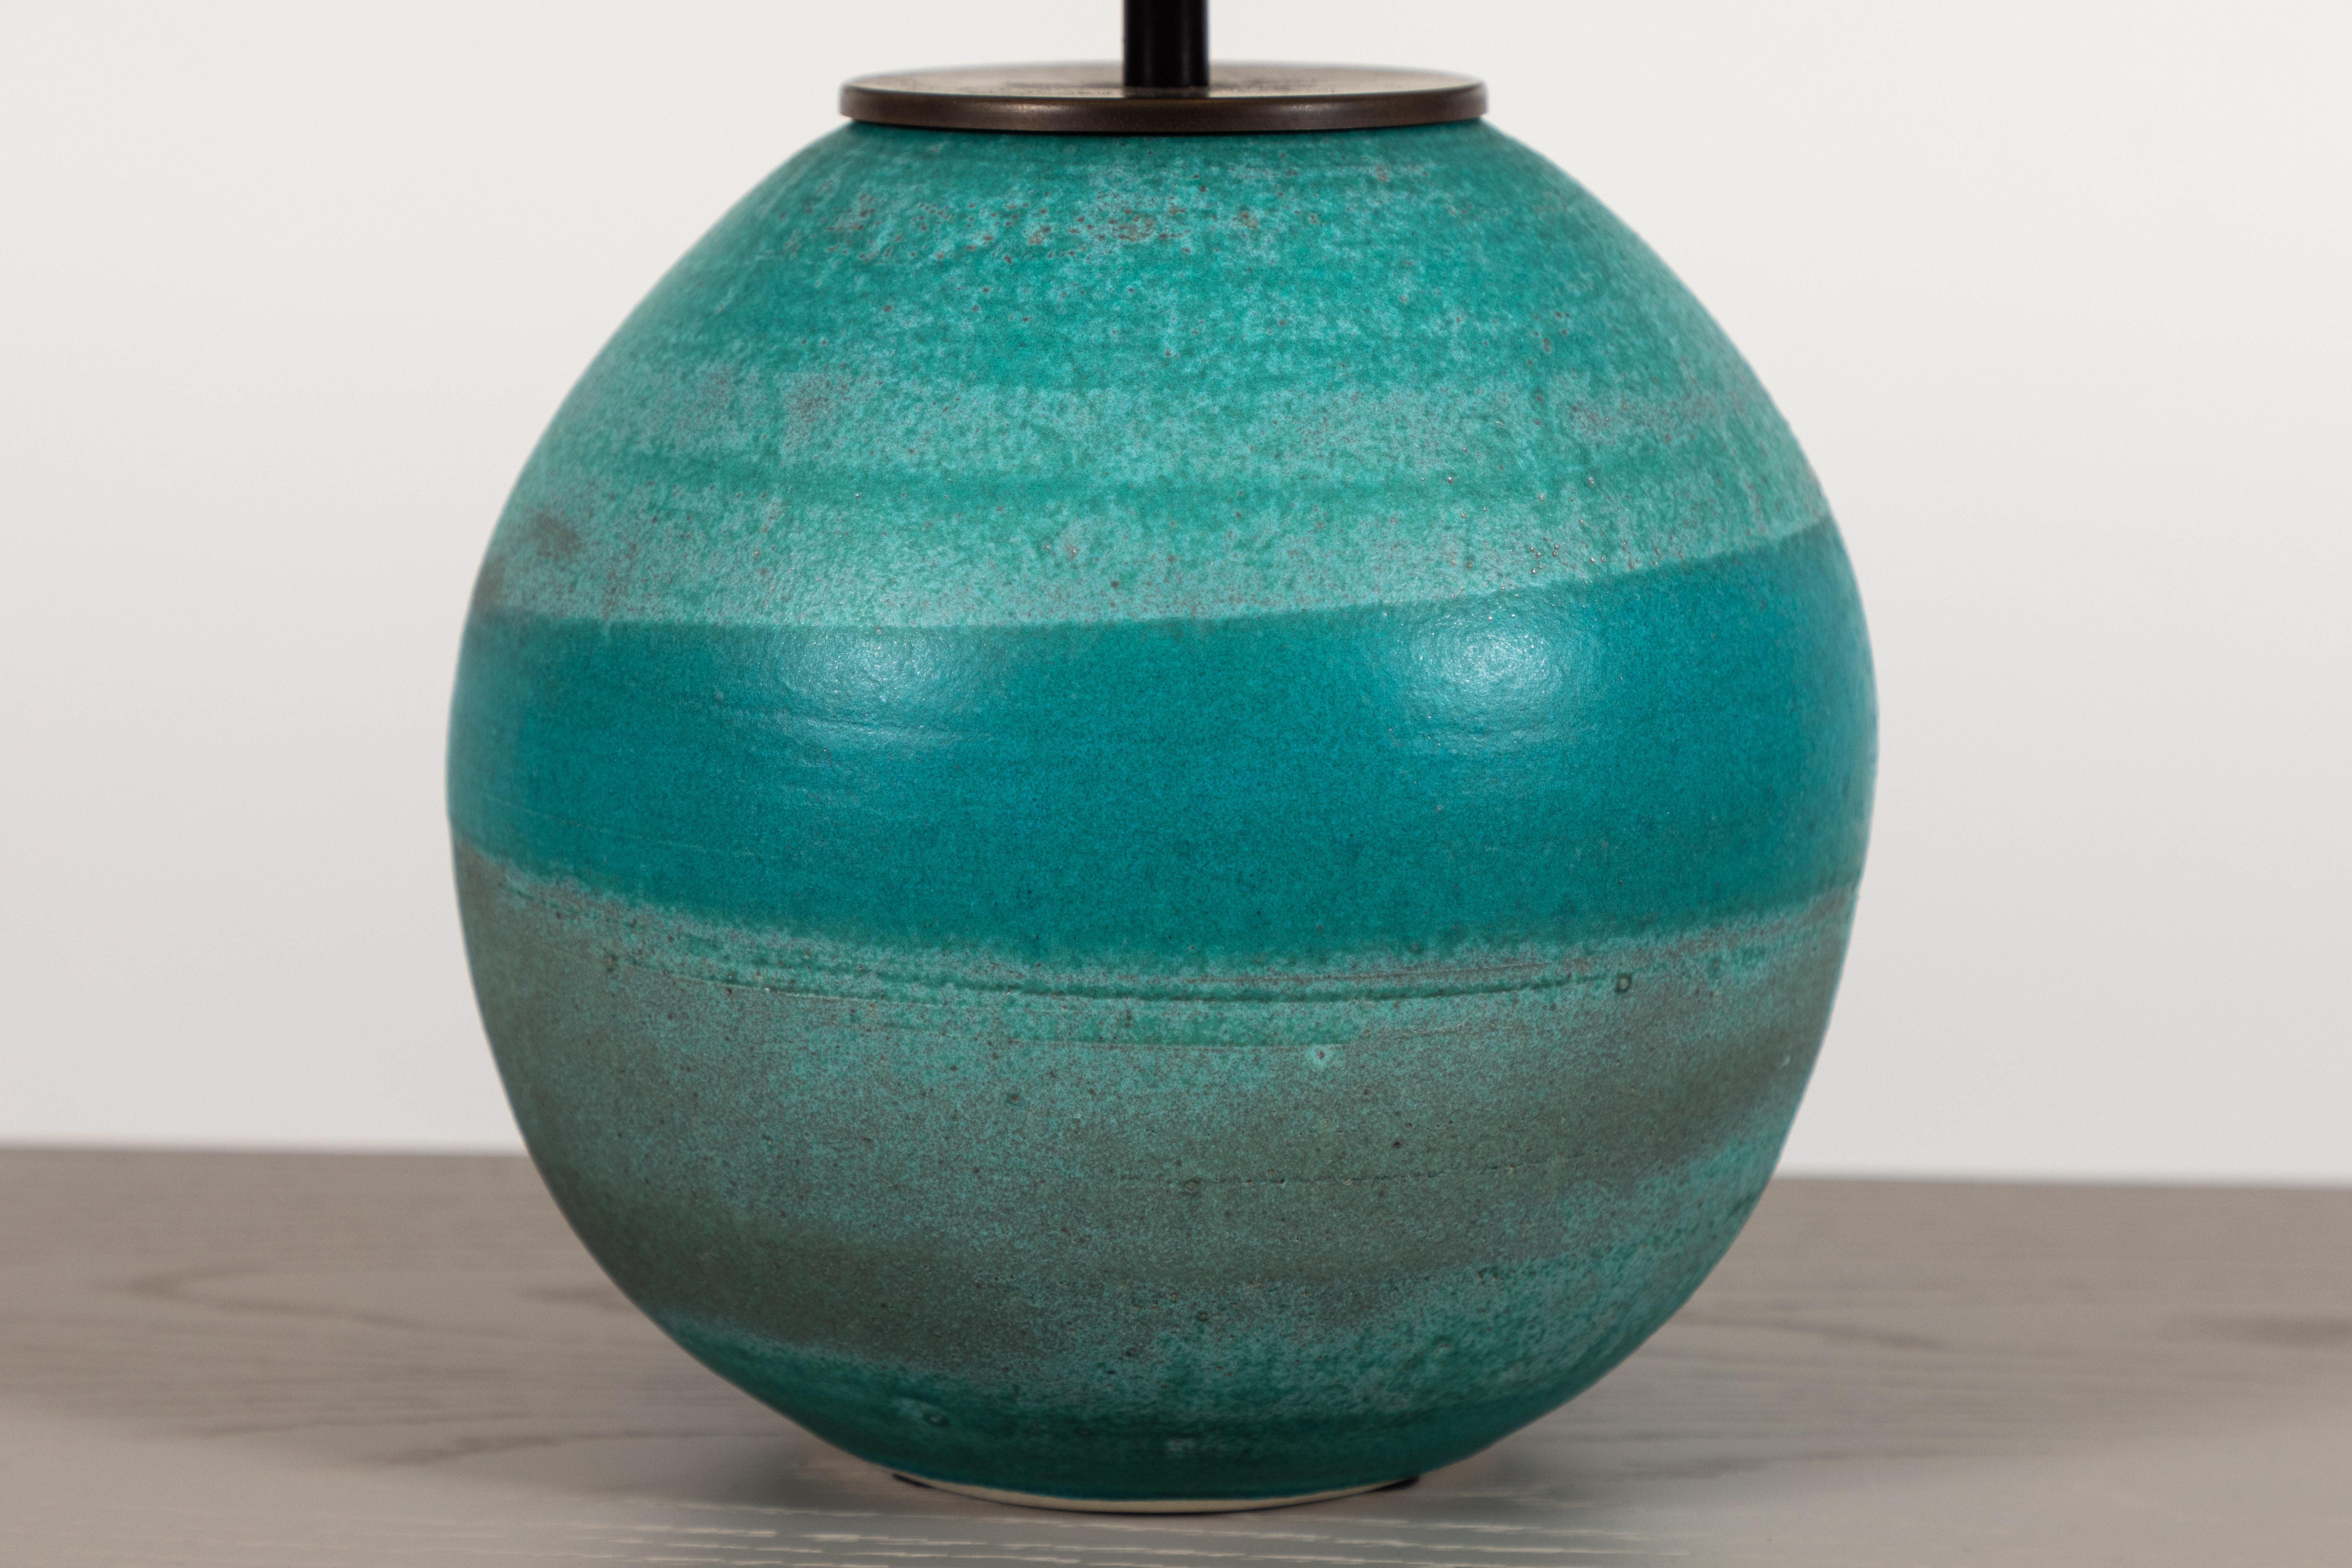 Mid-Century Modern Turquoise Ceramic Lamp by Victoria Morris for Lawson-Fenning